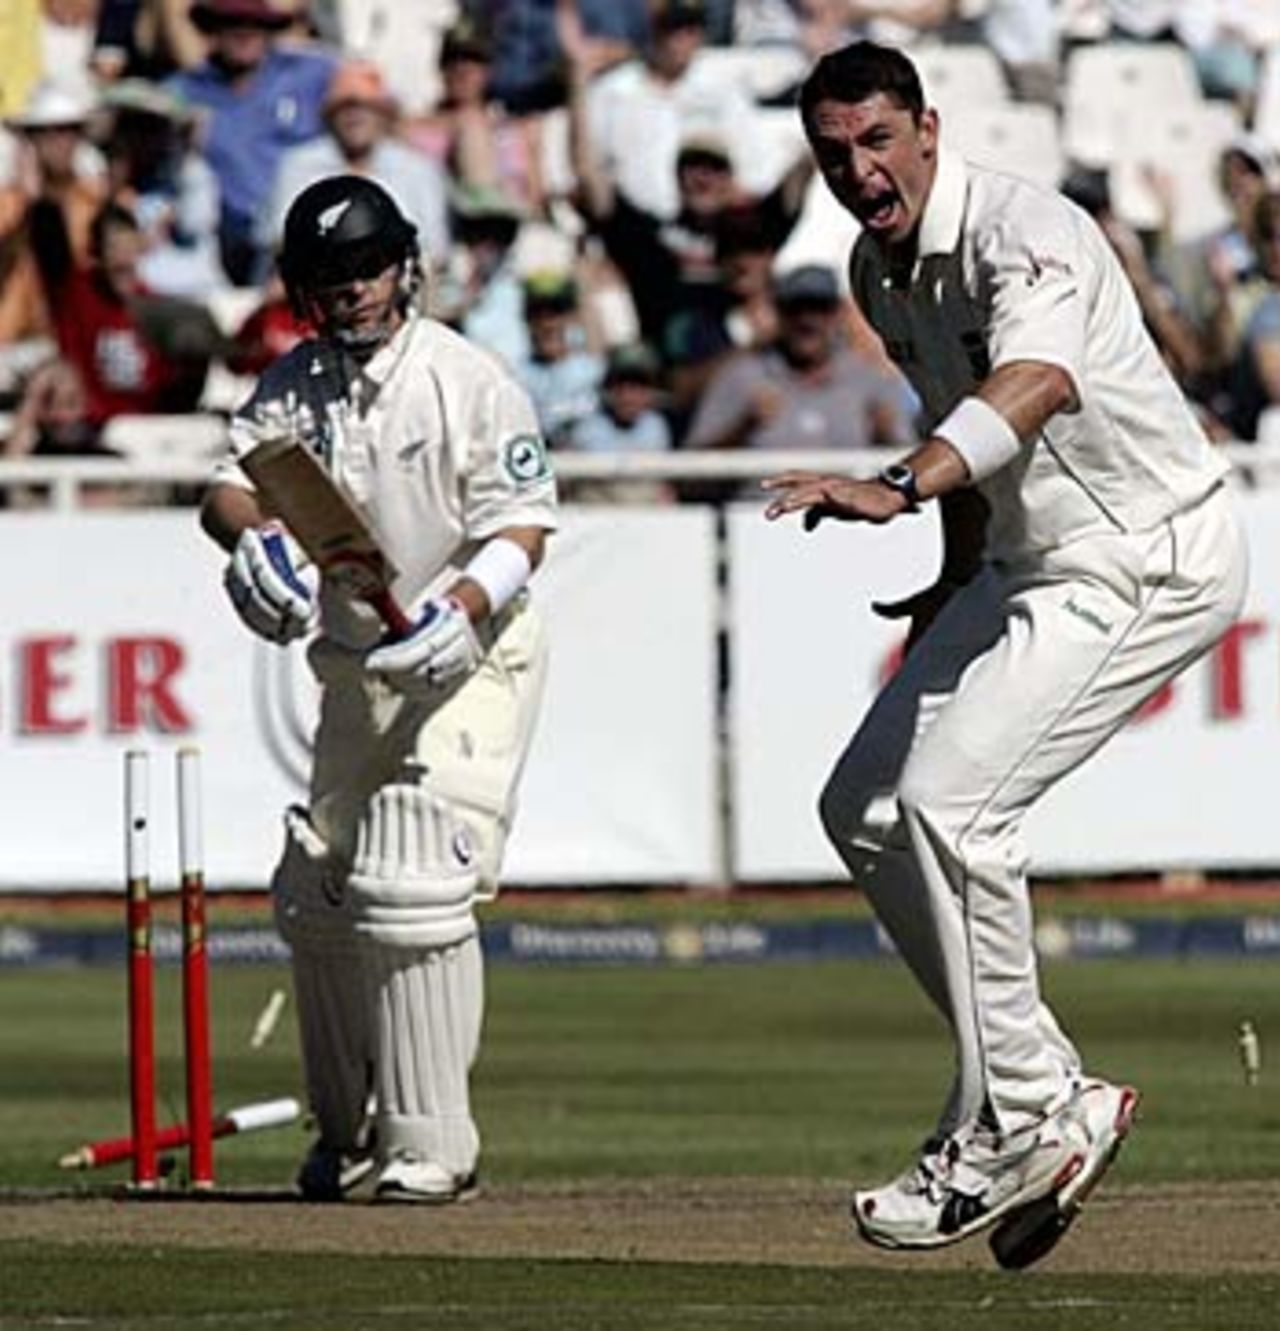 Michael Papps is bowled shouldering arms to Andre Nel, South Africa v New Zealand, 2nd Test, Cape Town, 1st day, April 27, 2006